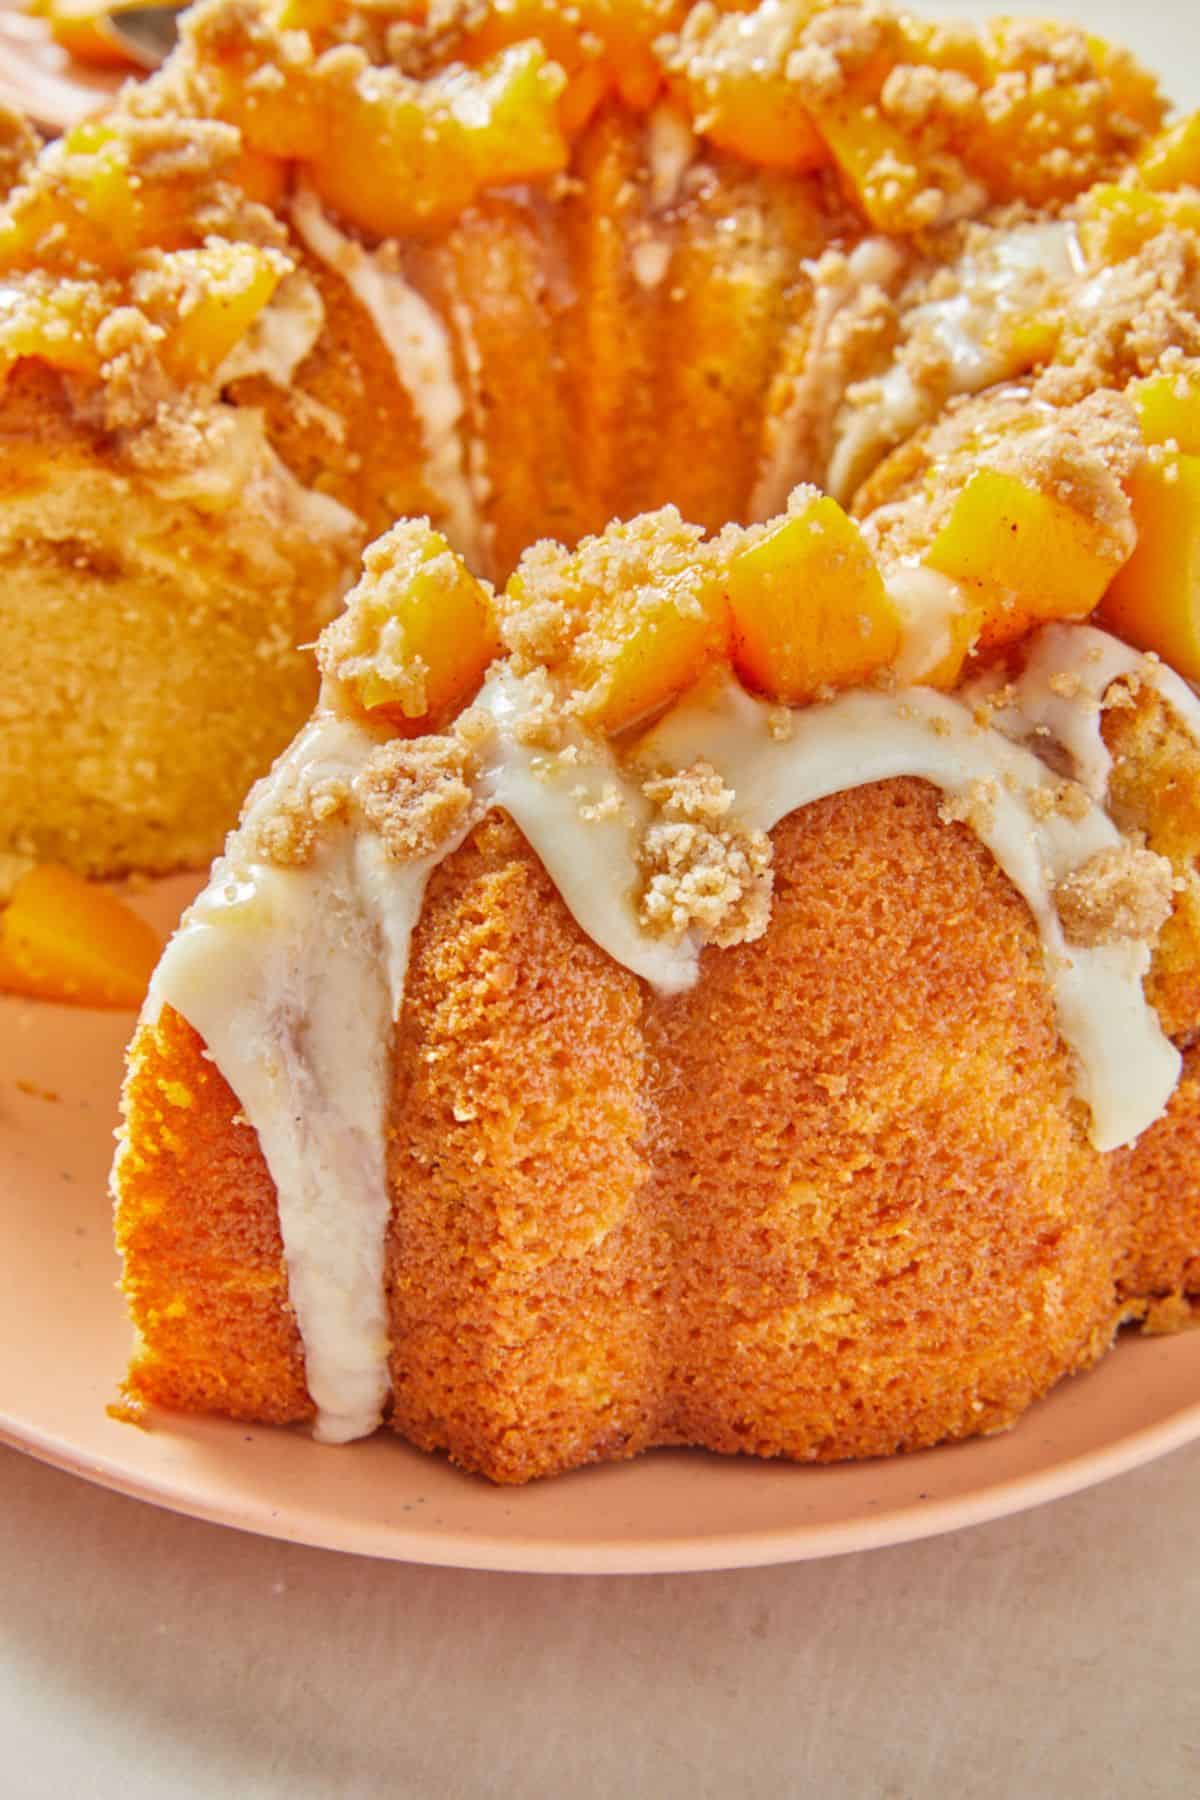 Closeup of a peach cobbler pound cake showing the rich texture of the cake with a topping of diced peaches, crumbles, and drizzled icing on a pink plate